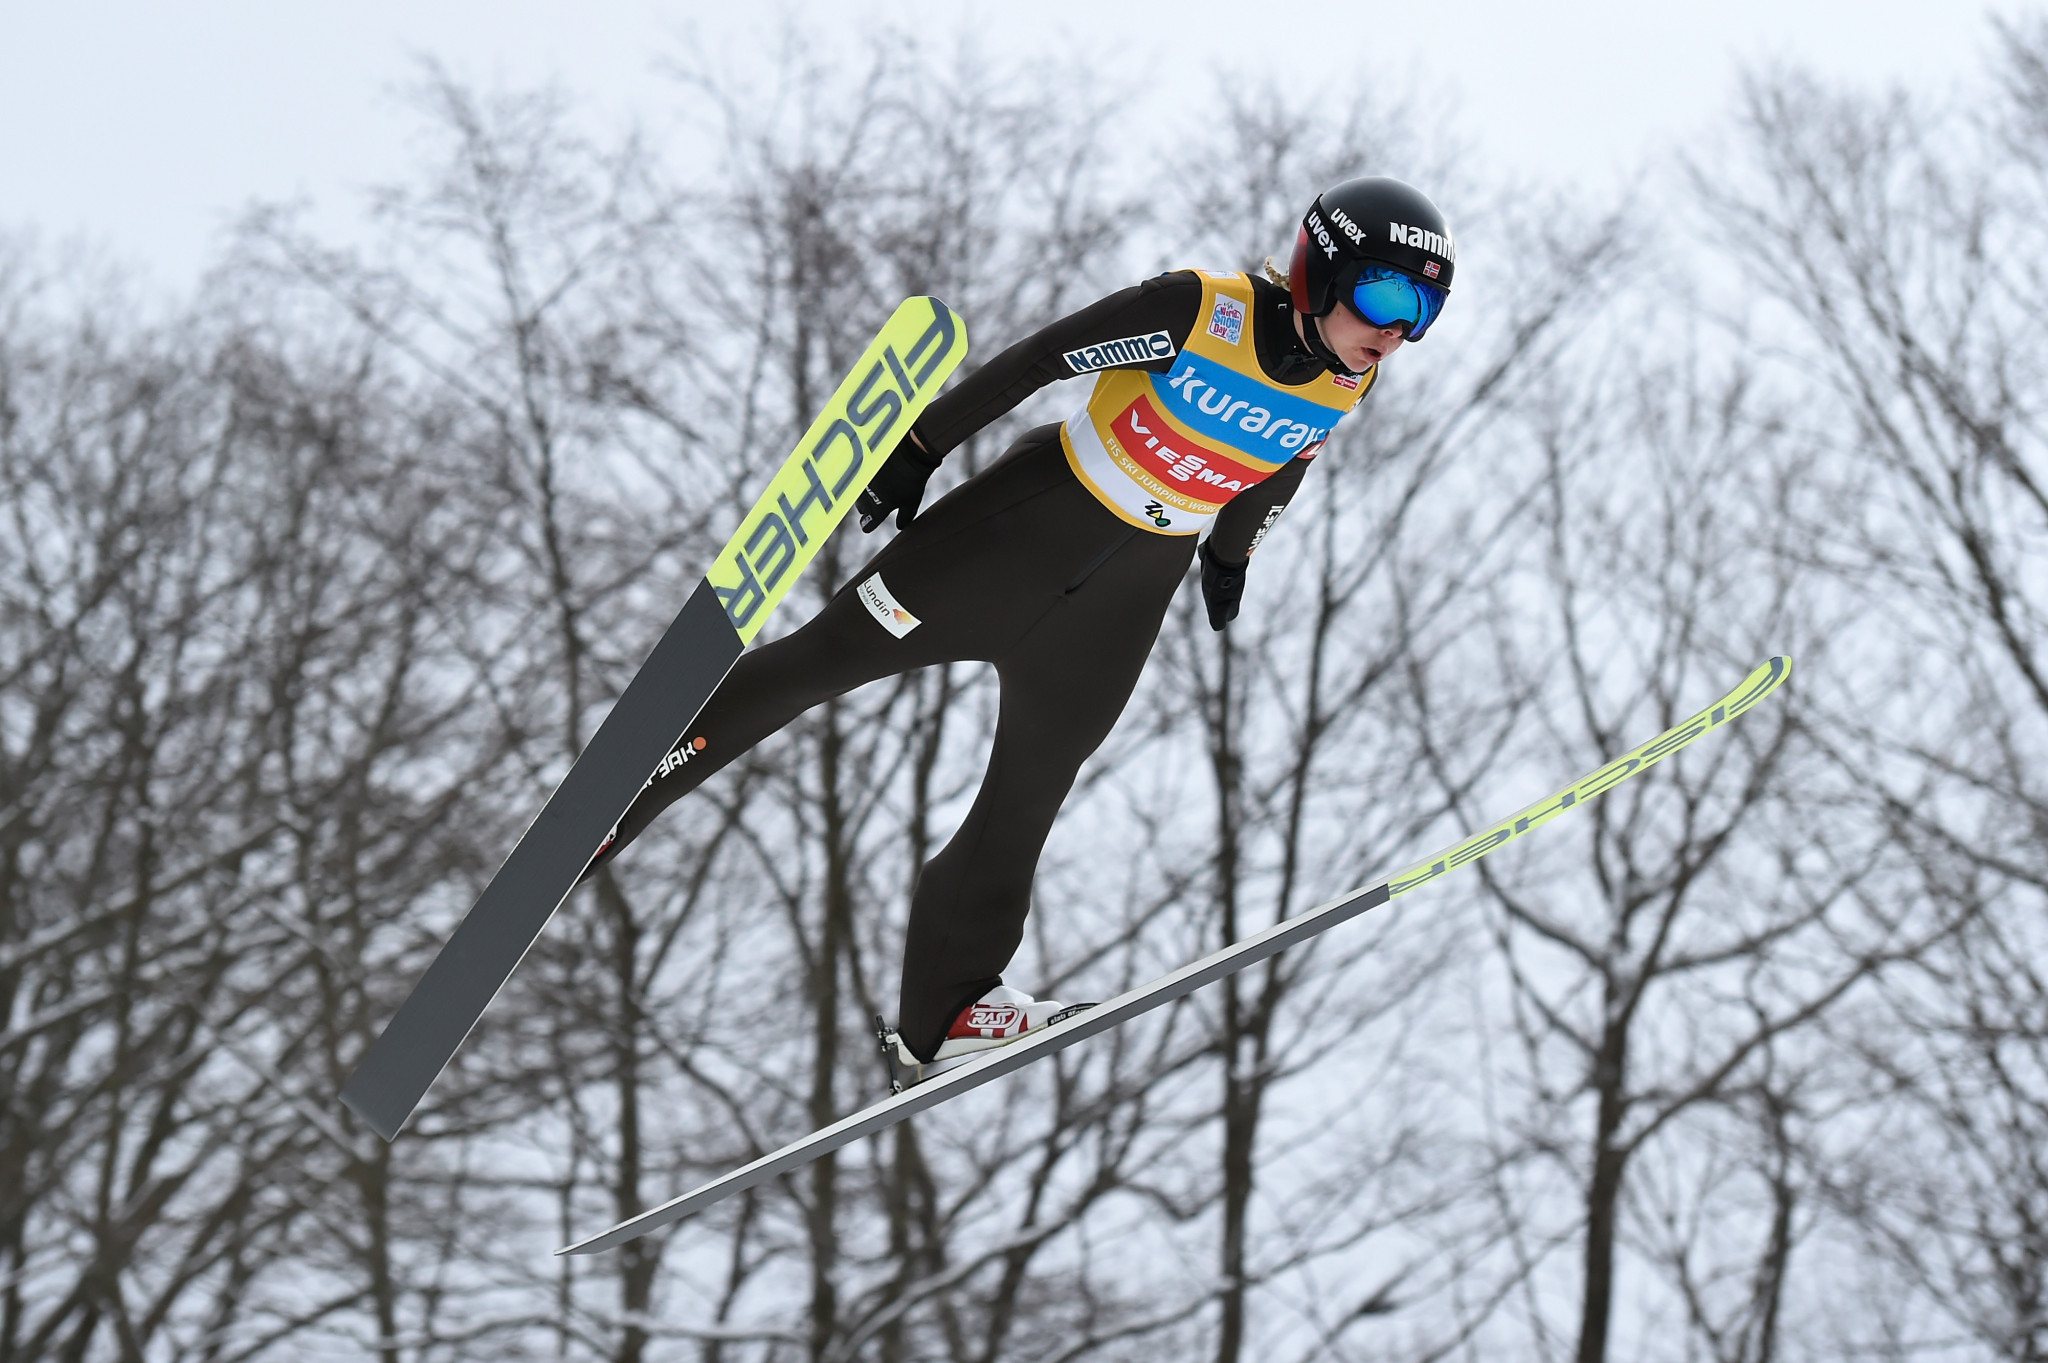 Maren Lundby has twice lost the World Cup lead to Chiara Hölzl this season ©Getty Images